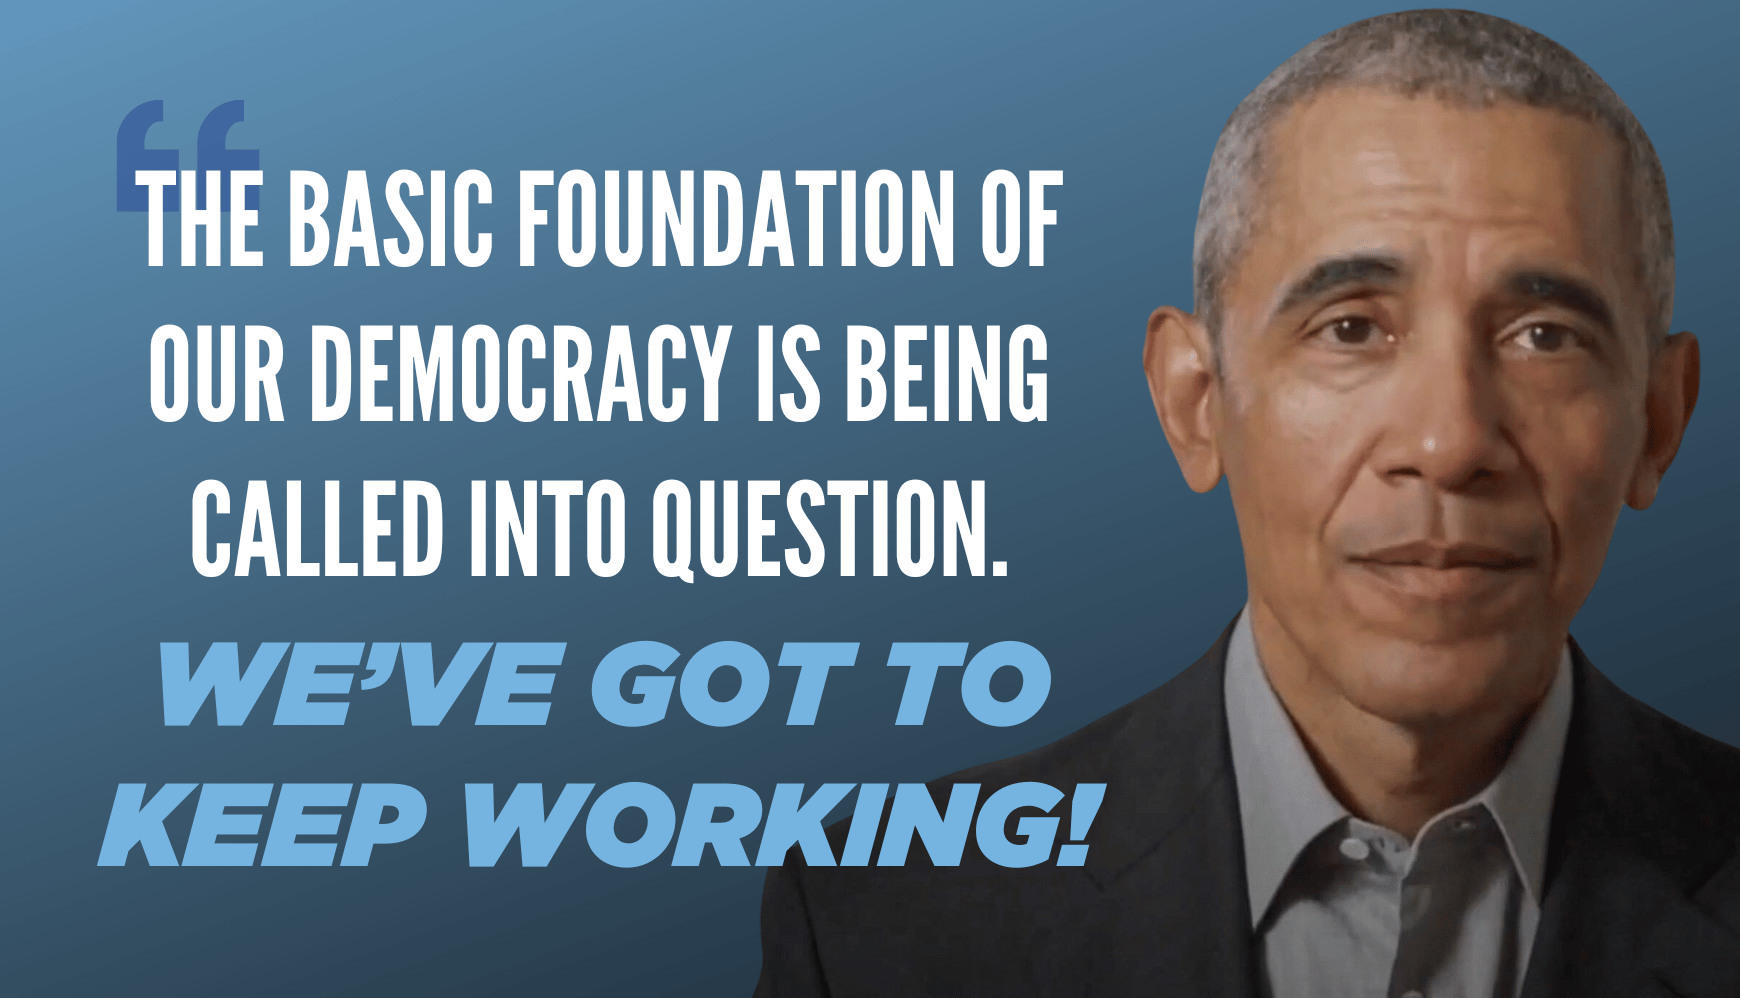 Barack Obama: The basic foundation of our democracy is being called into question right now…We’ve got to keep working.